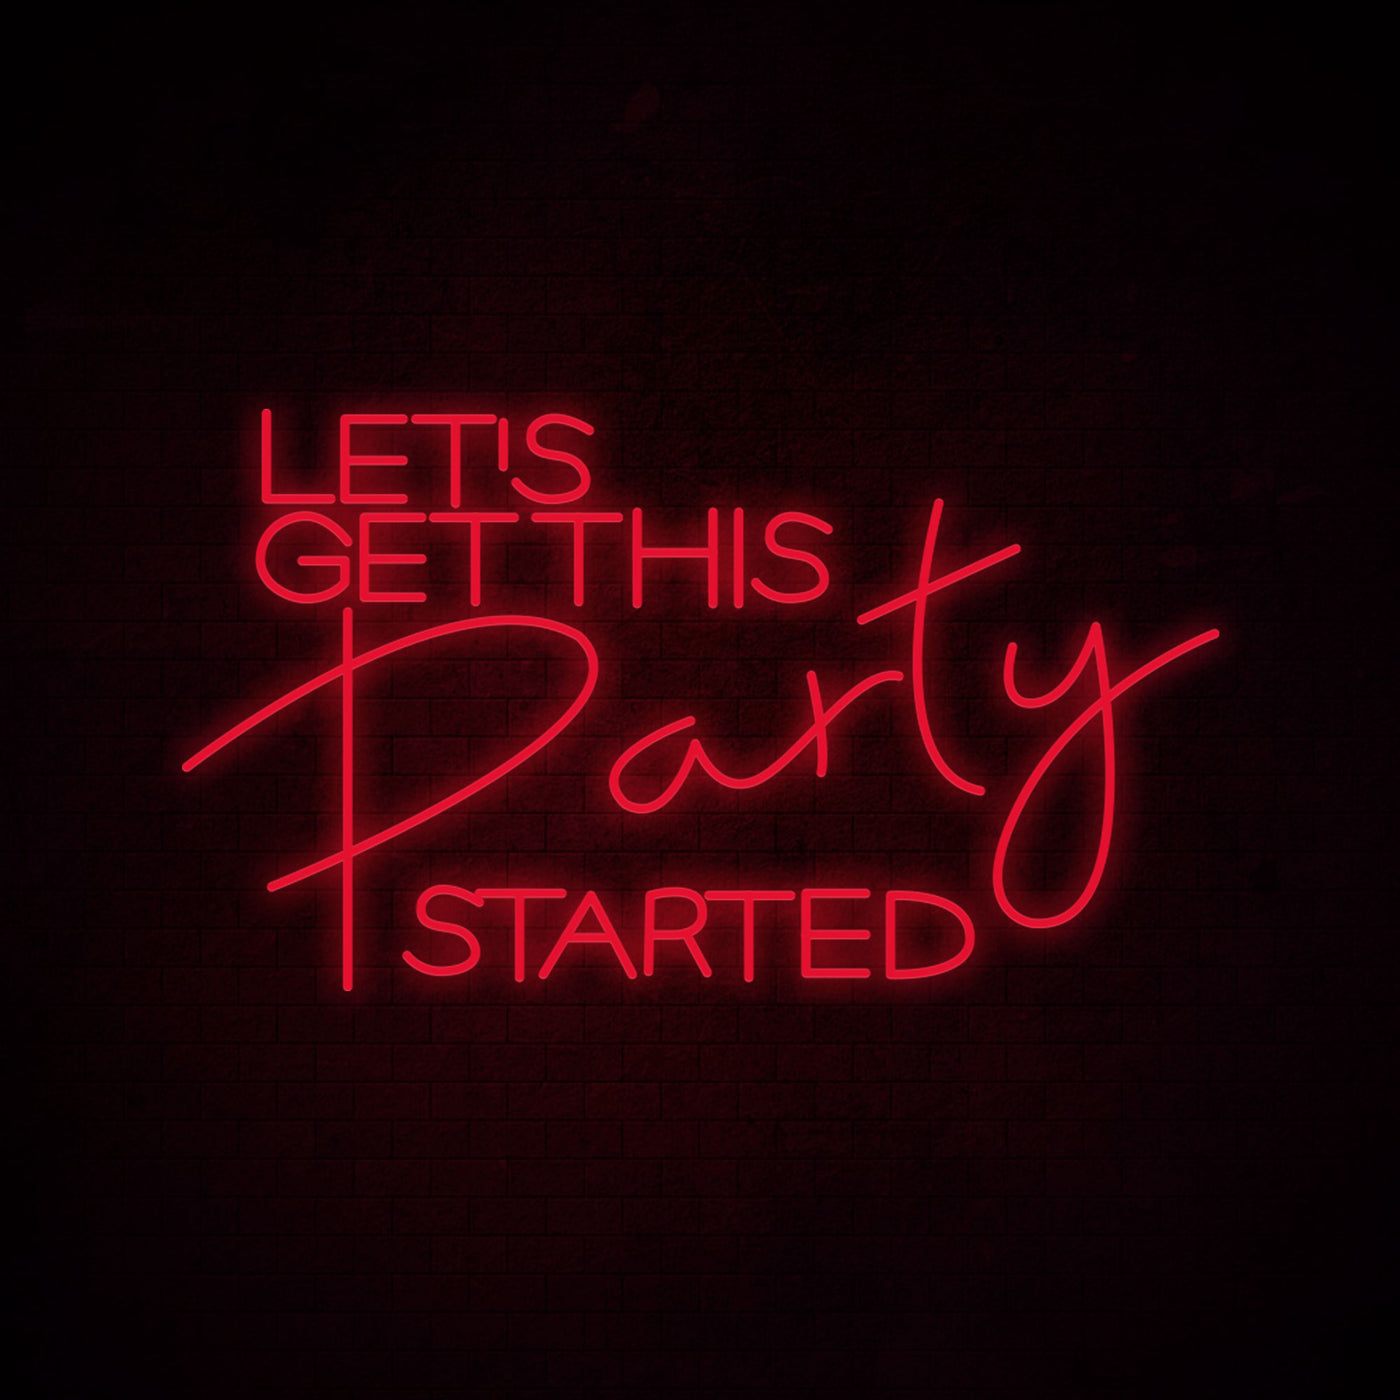 Let's get this party started - LED Neon Signs